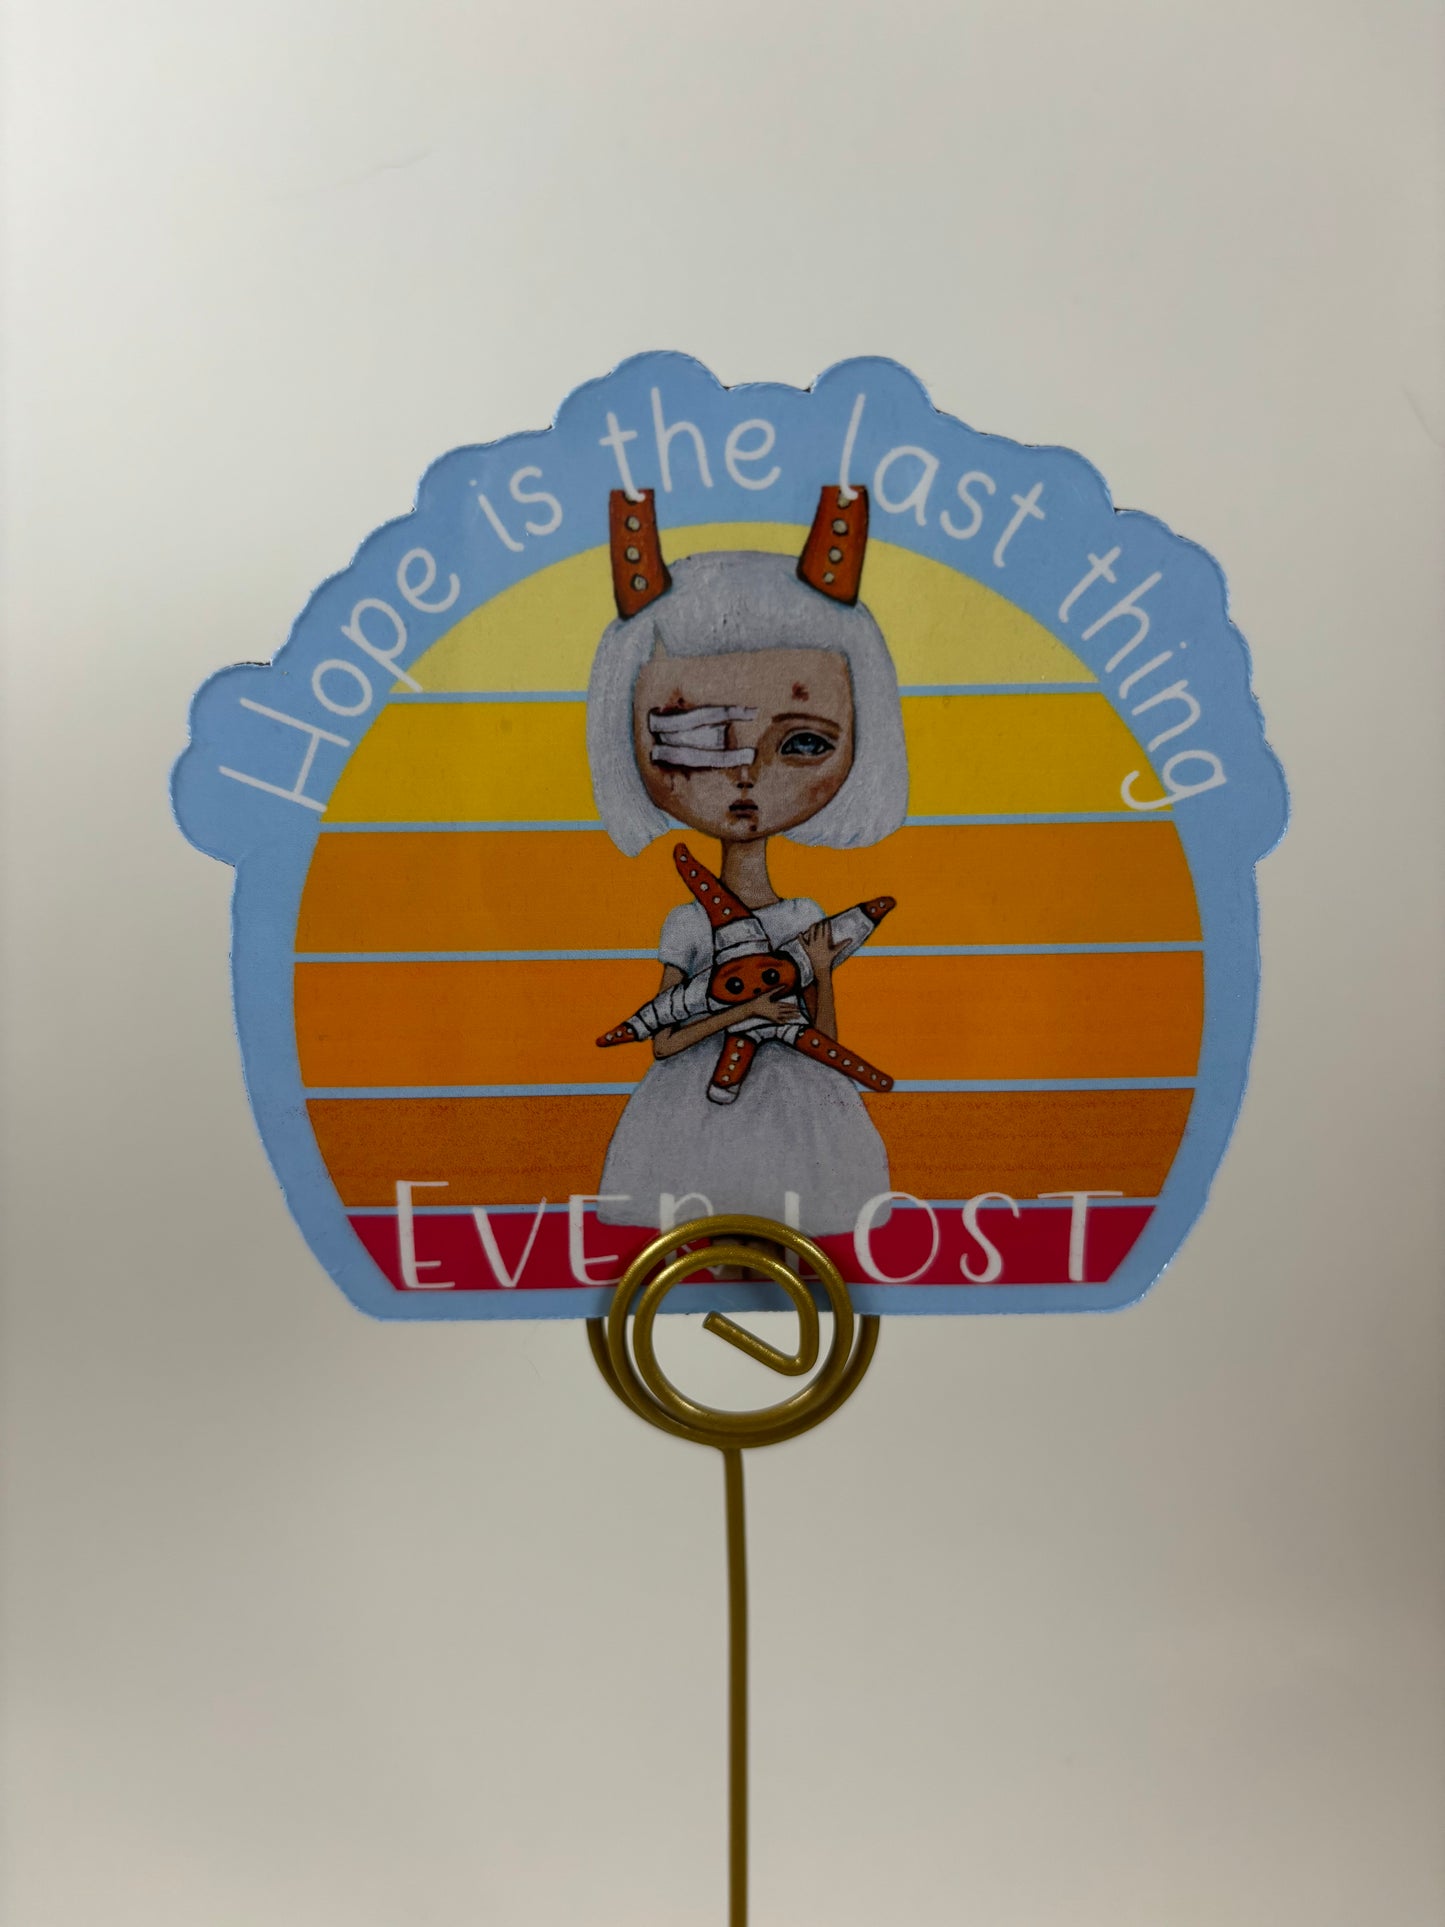 "Hope is the last thing ever lost" (featuring Clinging to Hope) Refrigerator Magnet